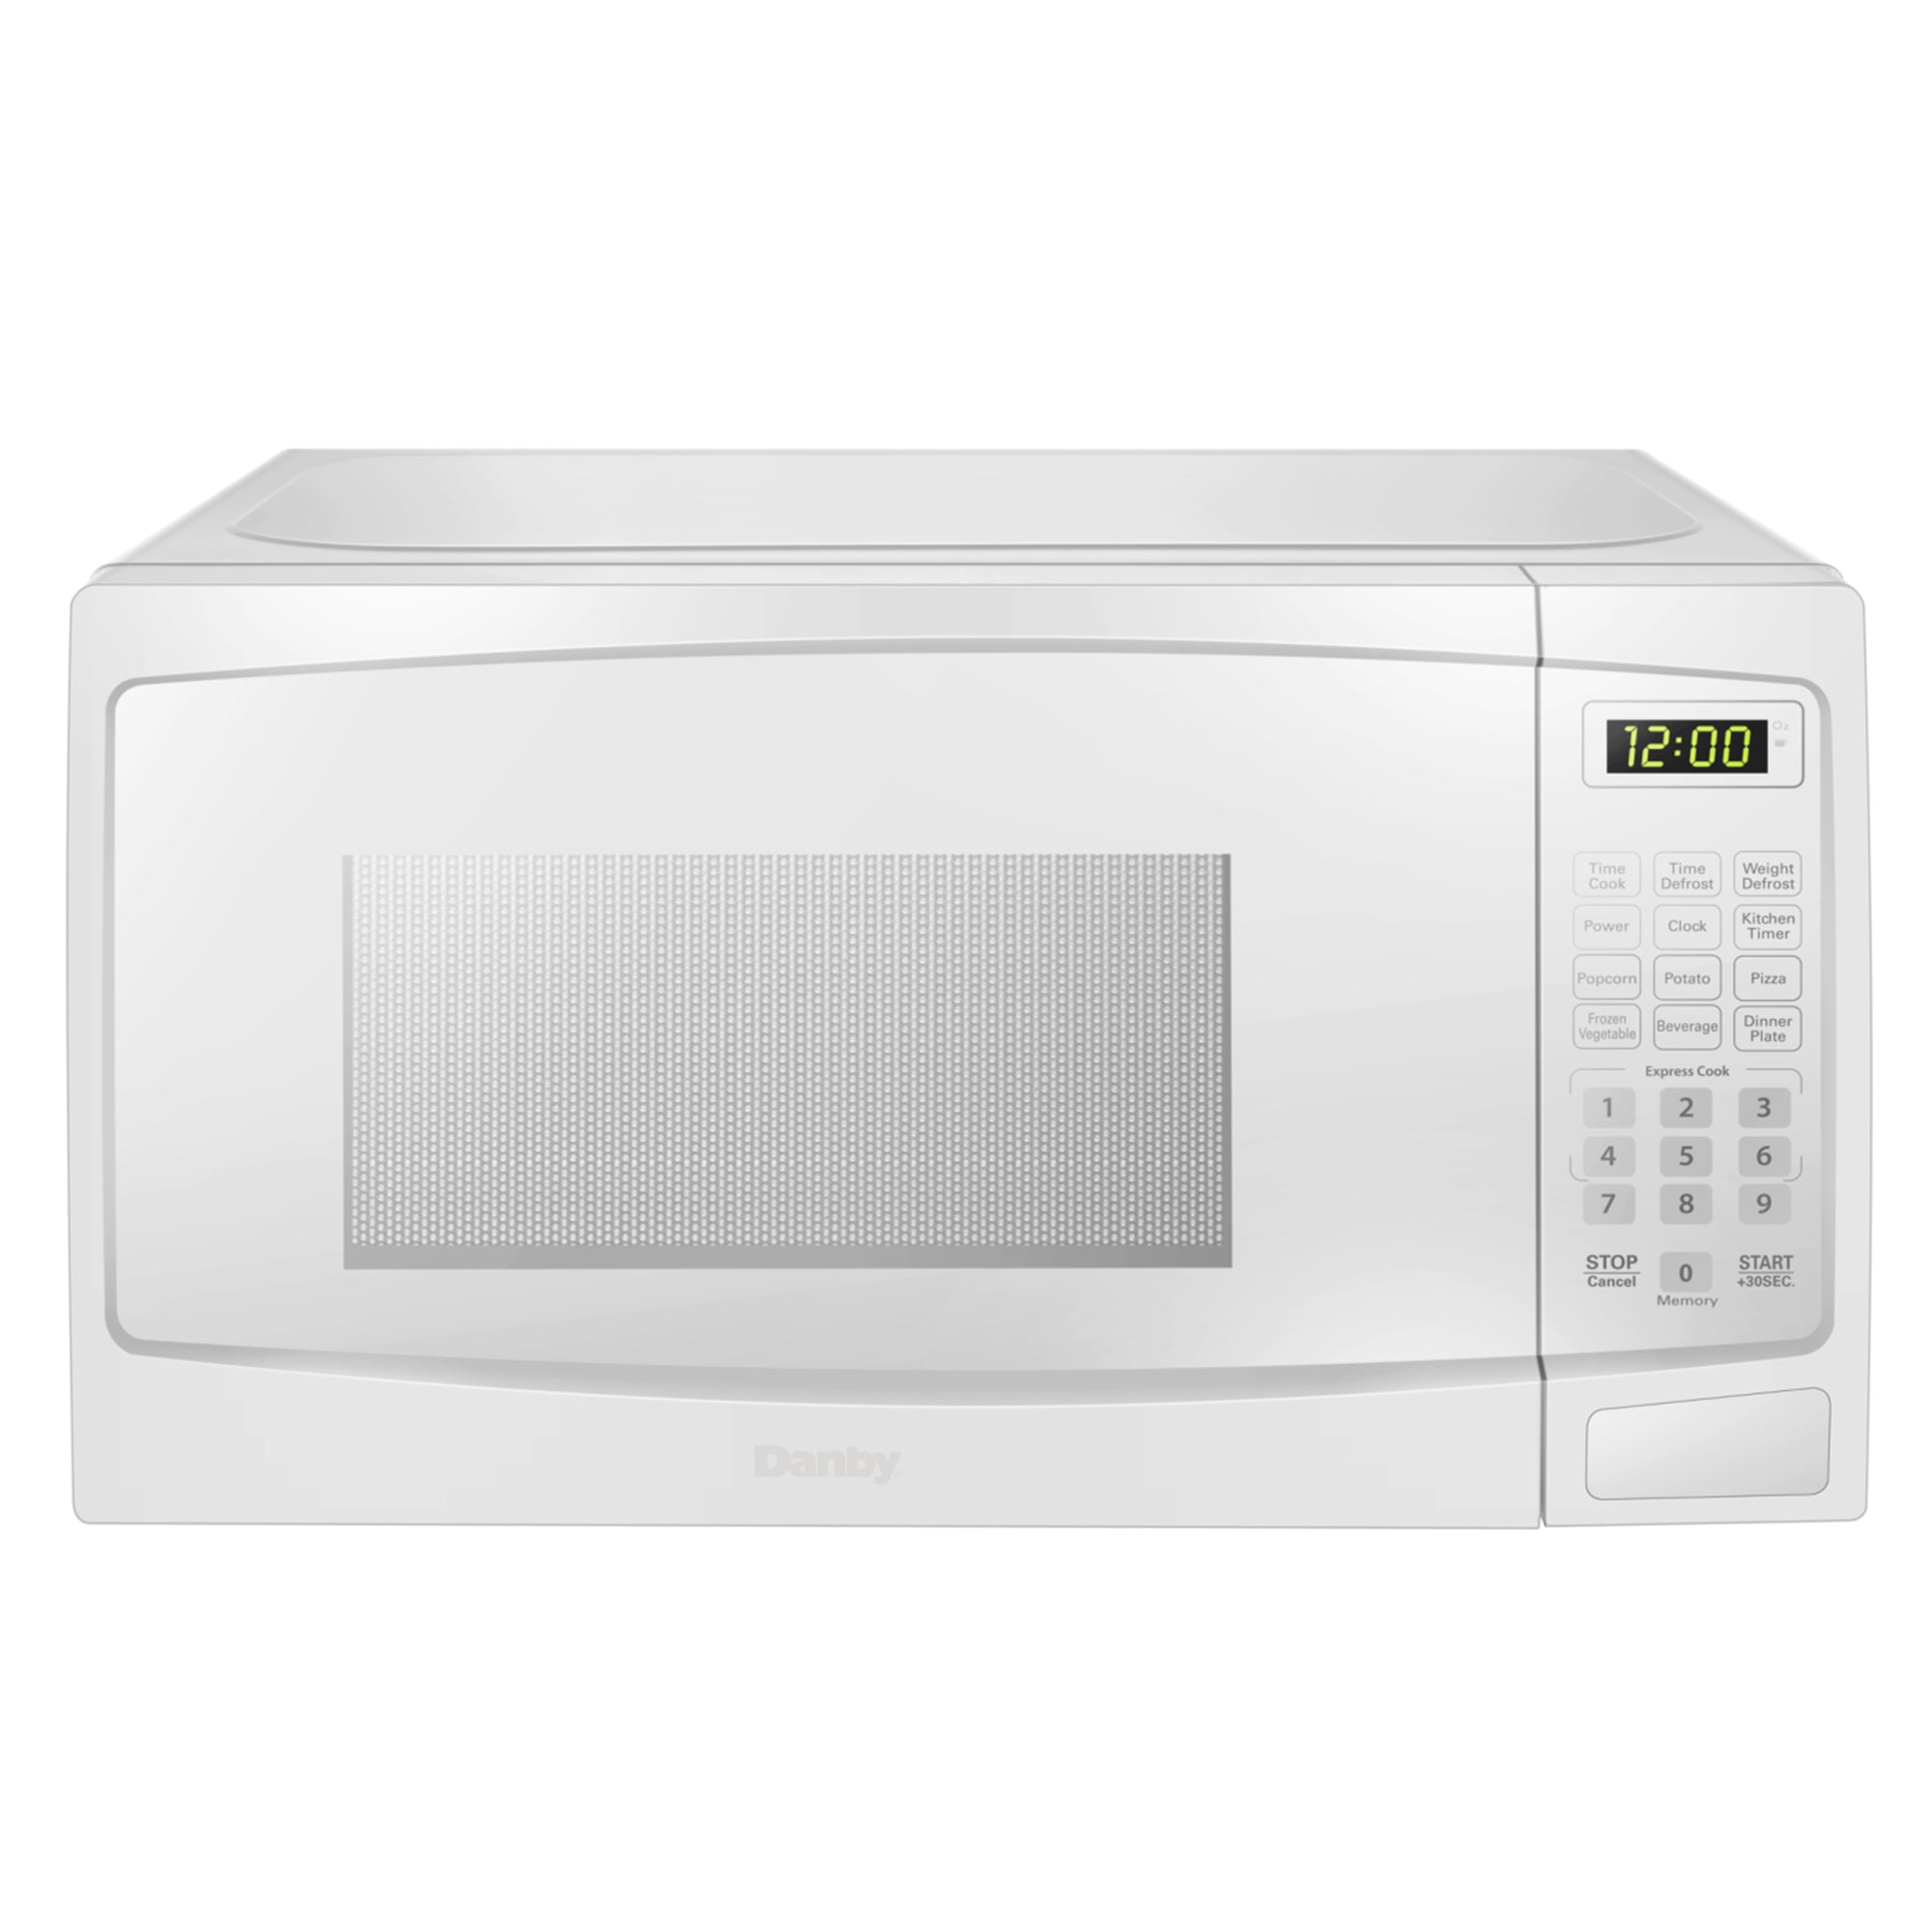 Danby - 0.7 cu. Ft  Counter top Microwave in White - DBMW0720BWW